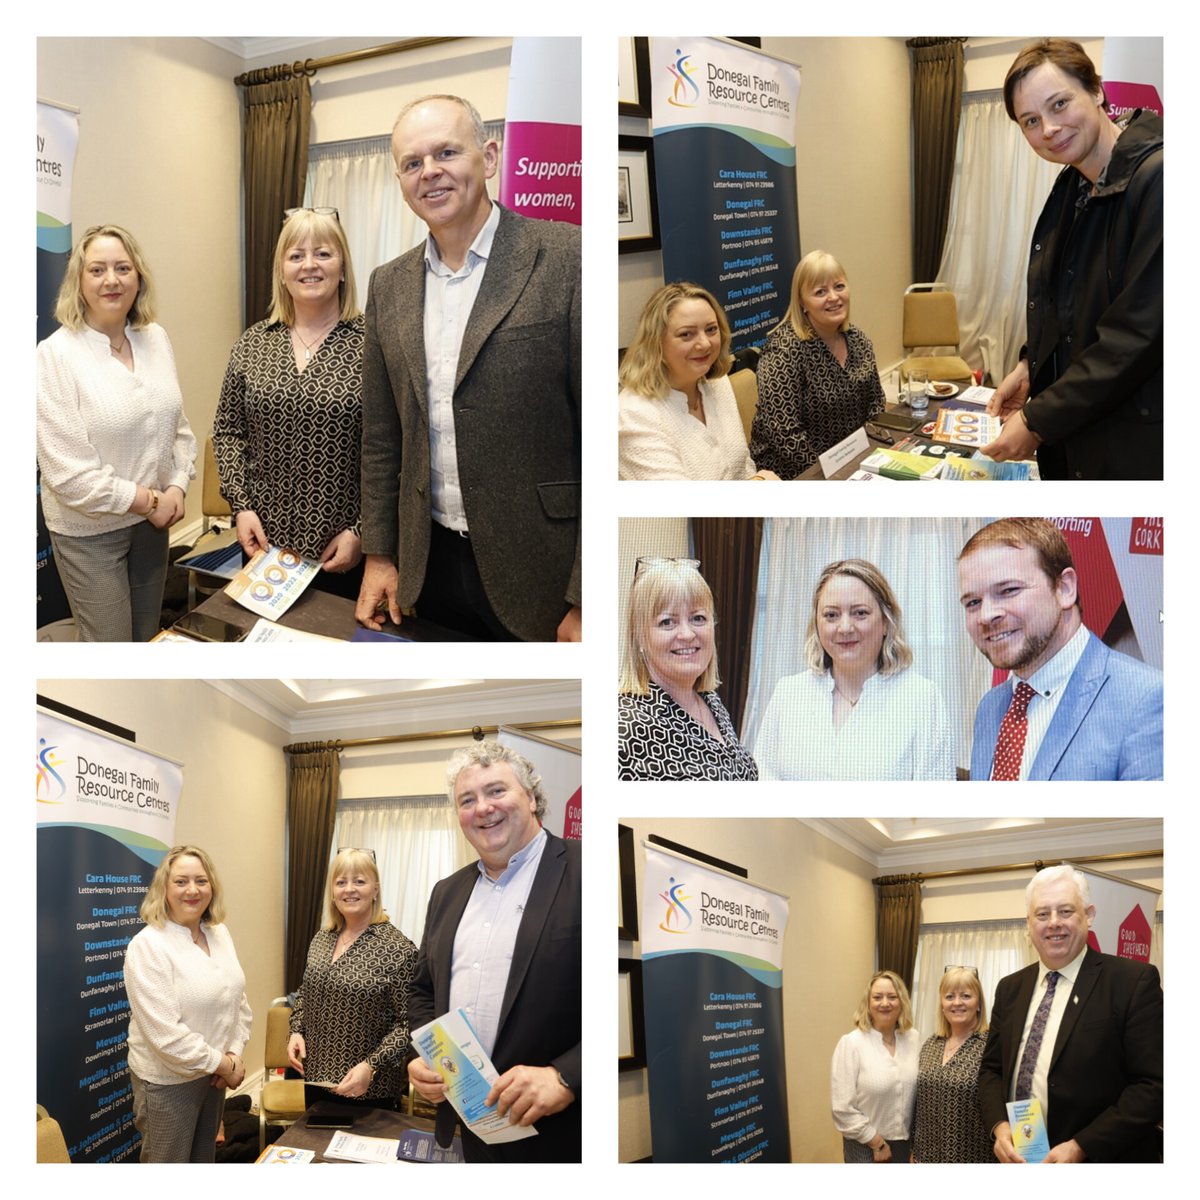 Thank you to Joe McHugh TD, Dr Anna Visser, Donnchadh Ó Laoghaire TD, Thomas Gould TD and Thomas Pringle TD, for meeting representatives from the Donegal FRC Network for the Children’s Rights Alliance Food Poverty Drop in day #familyresourceirl 
#childrightsirl